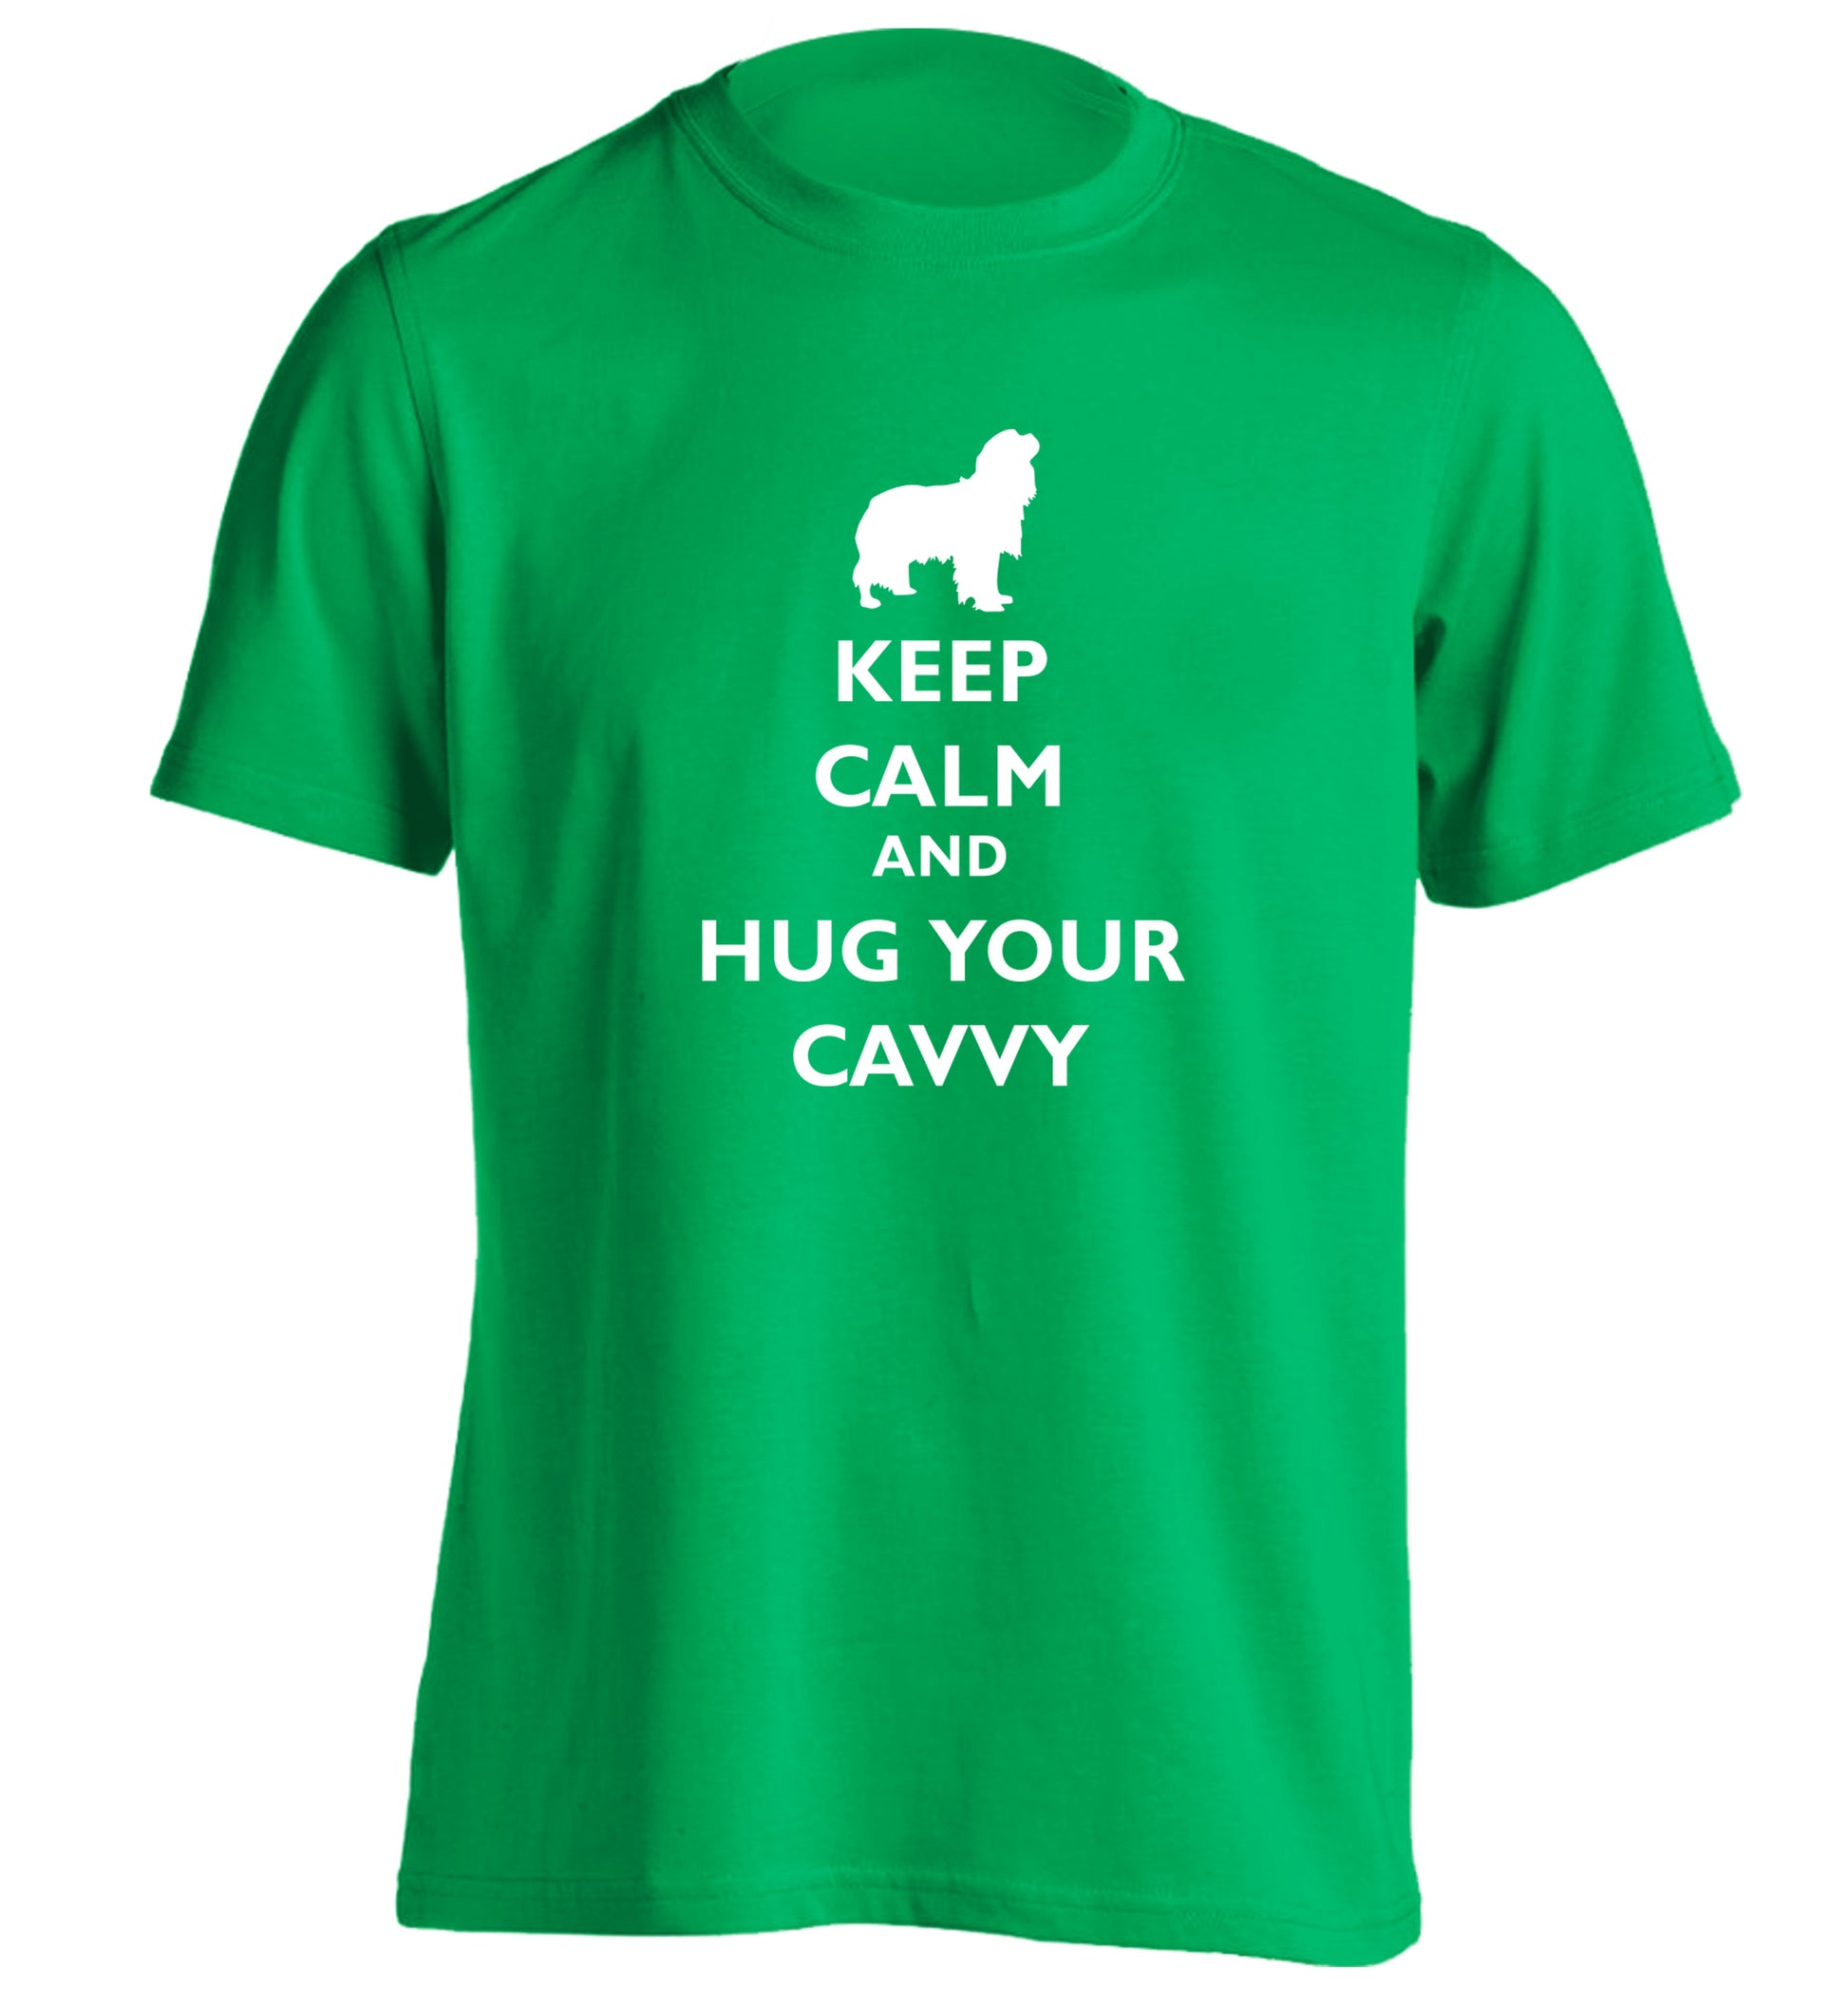 Keep calm and hug your cavvy adults unisex green Tshirt 2XL